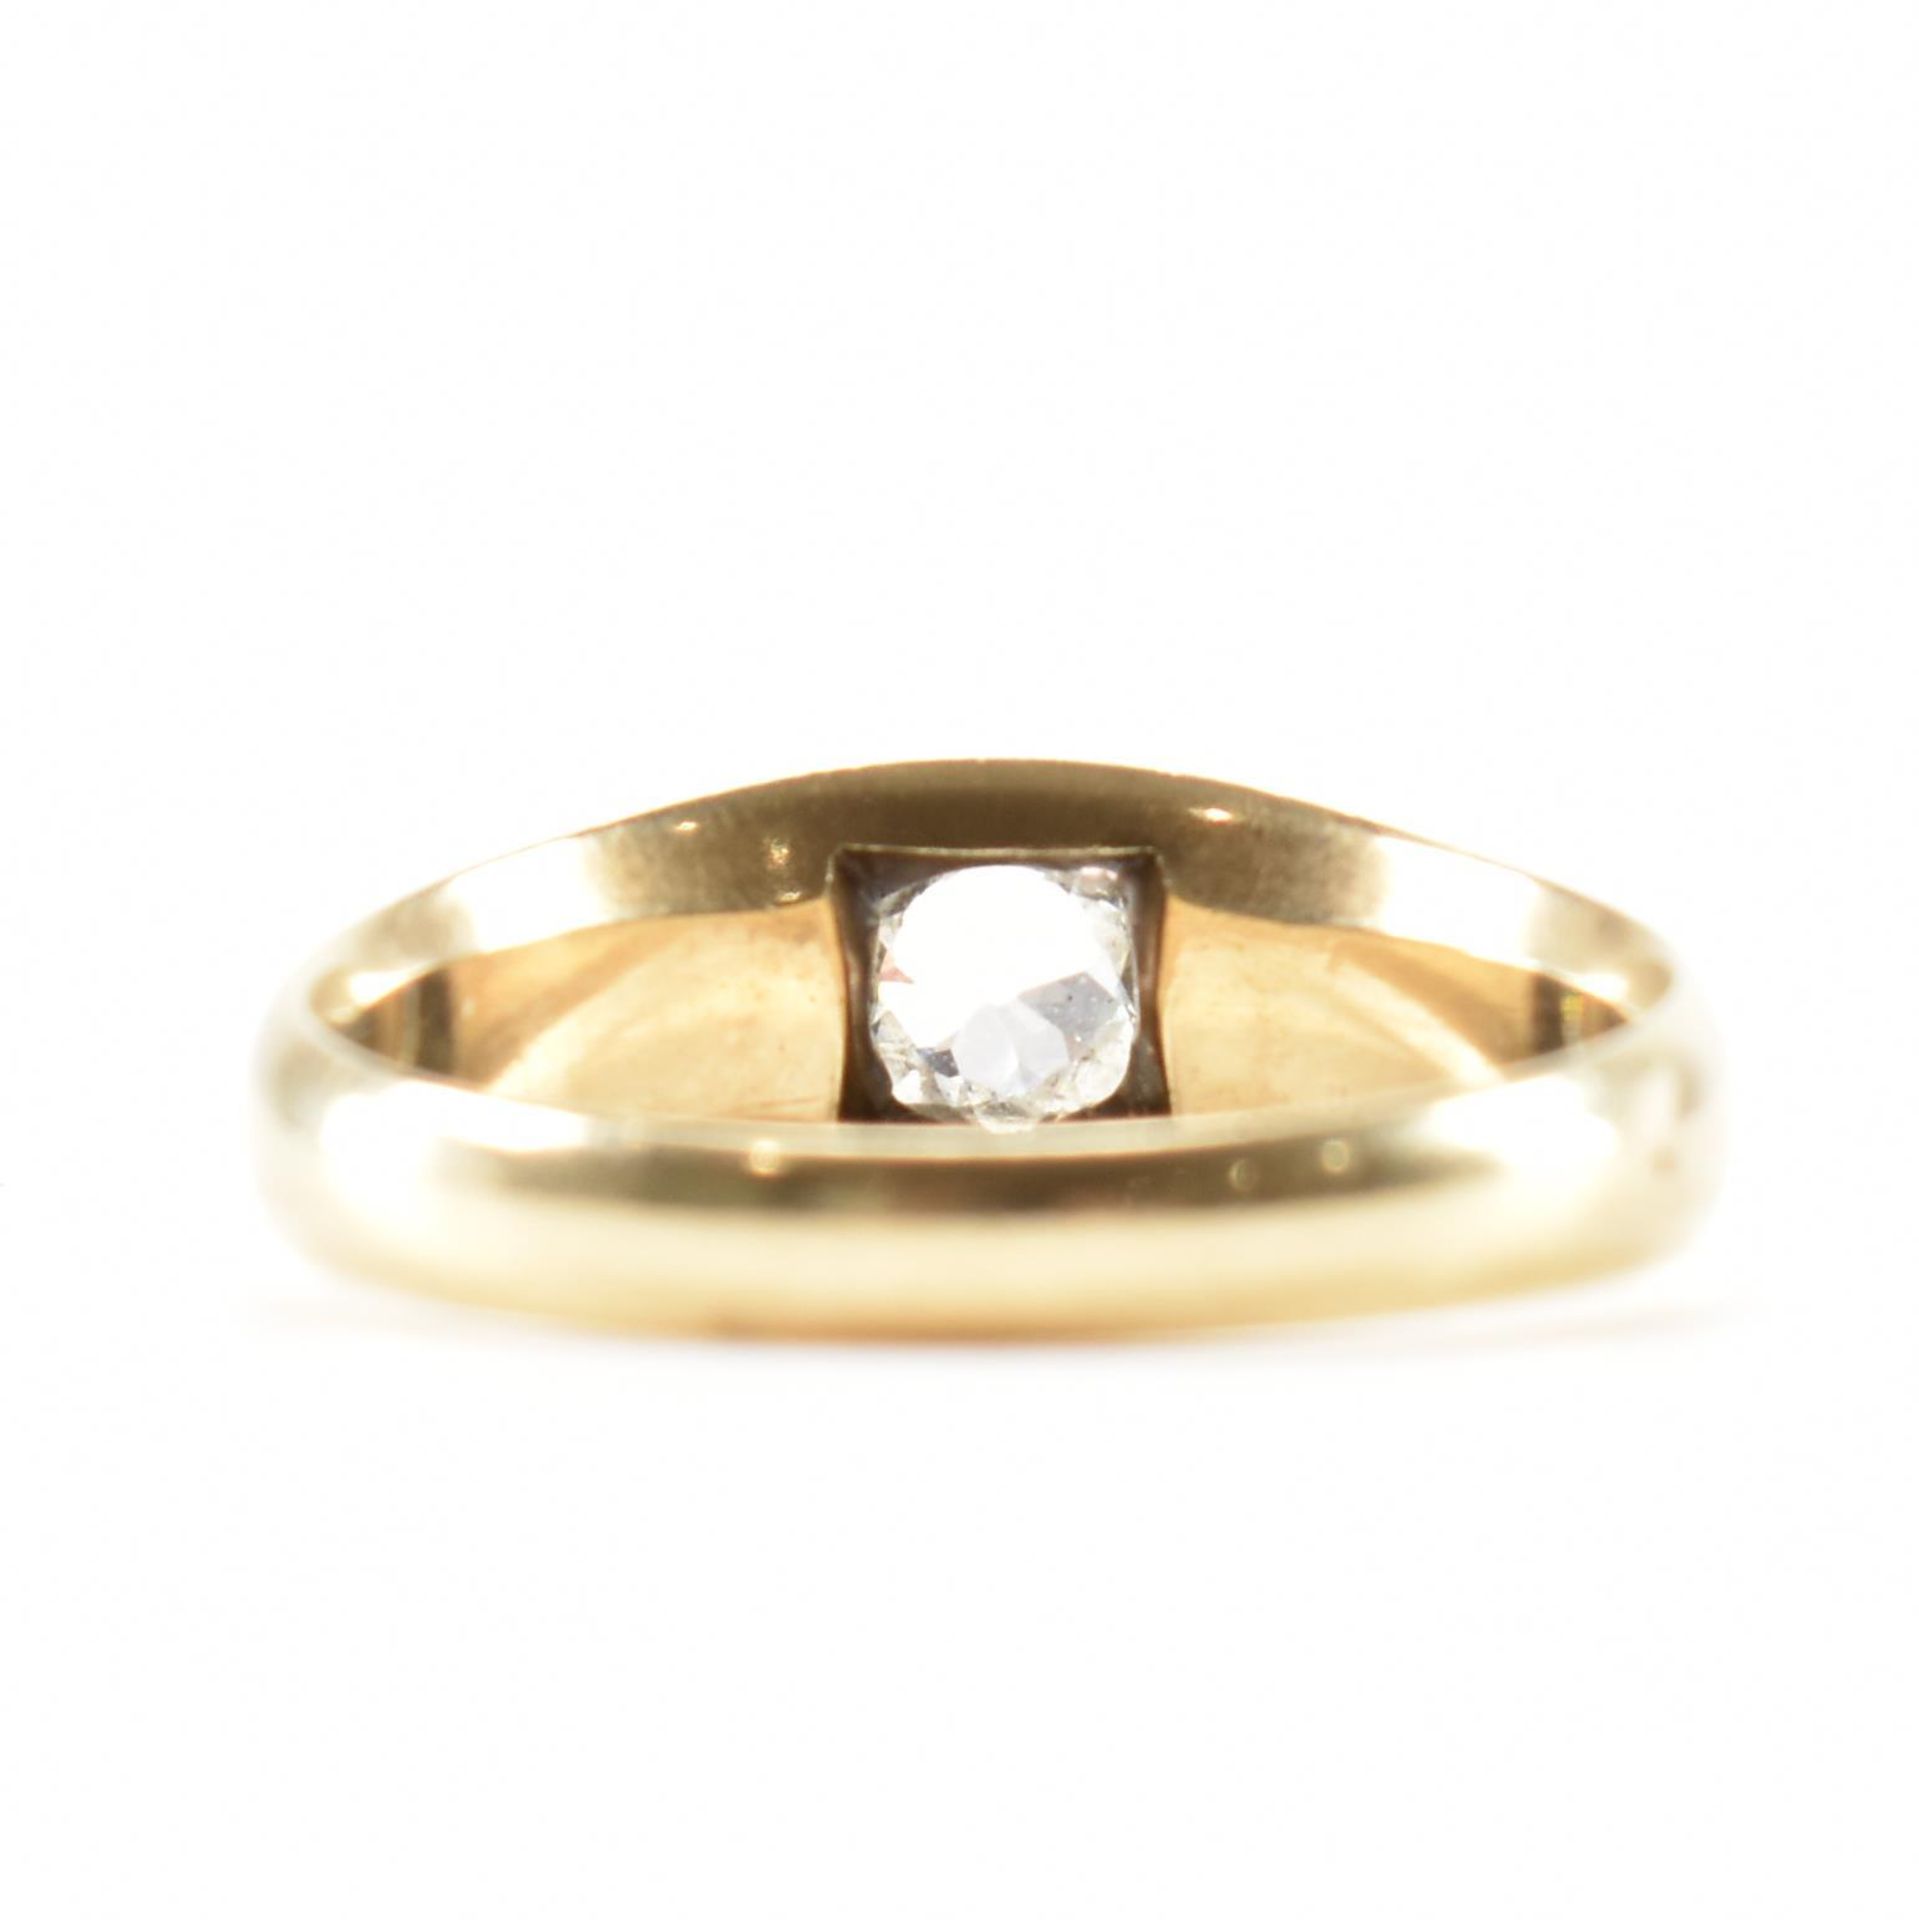 VINTAGE 18CT GOLD & DIAMOND SOLITAIRE RING - Image 4 of 7